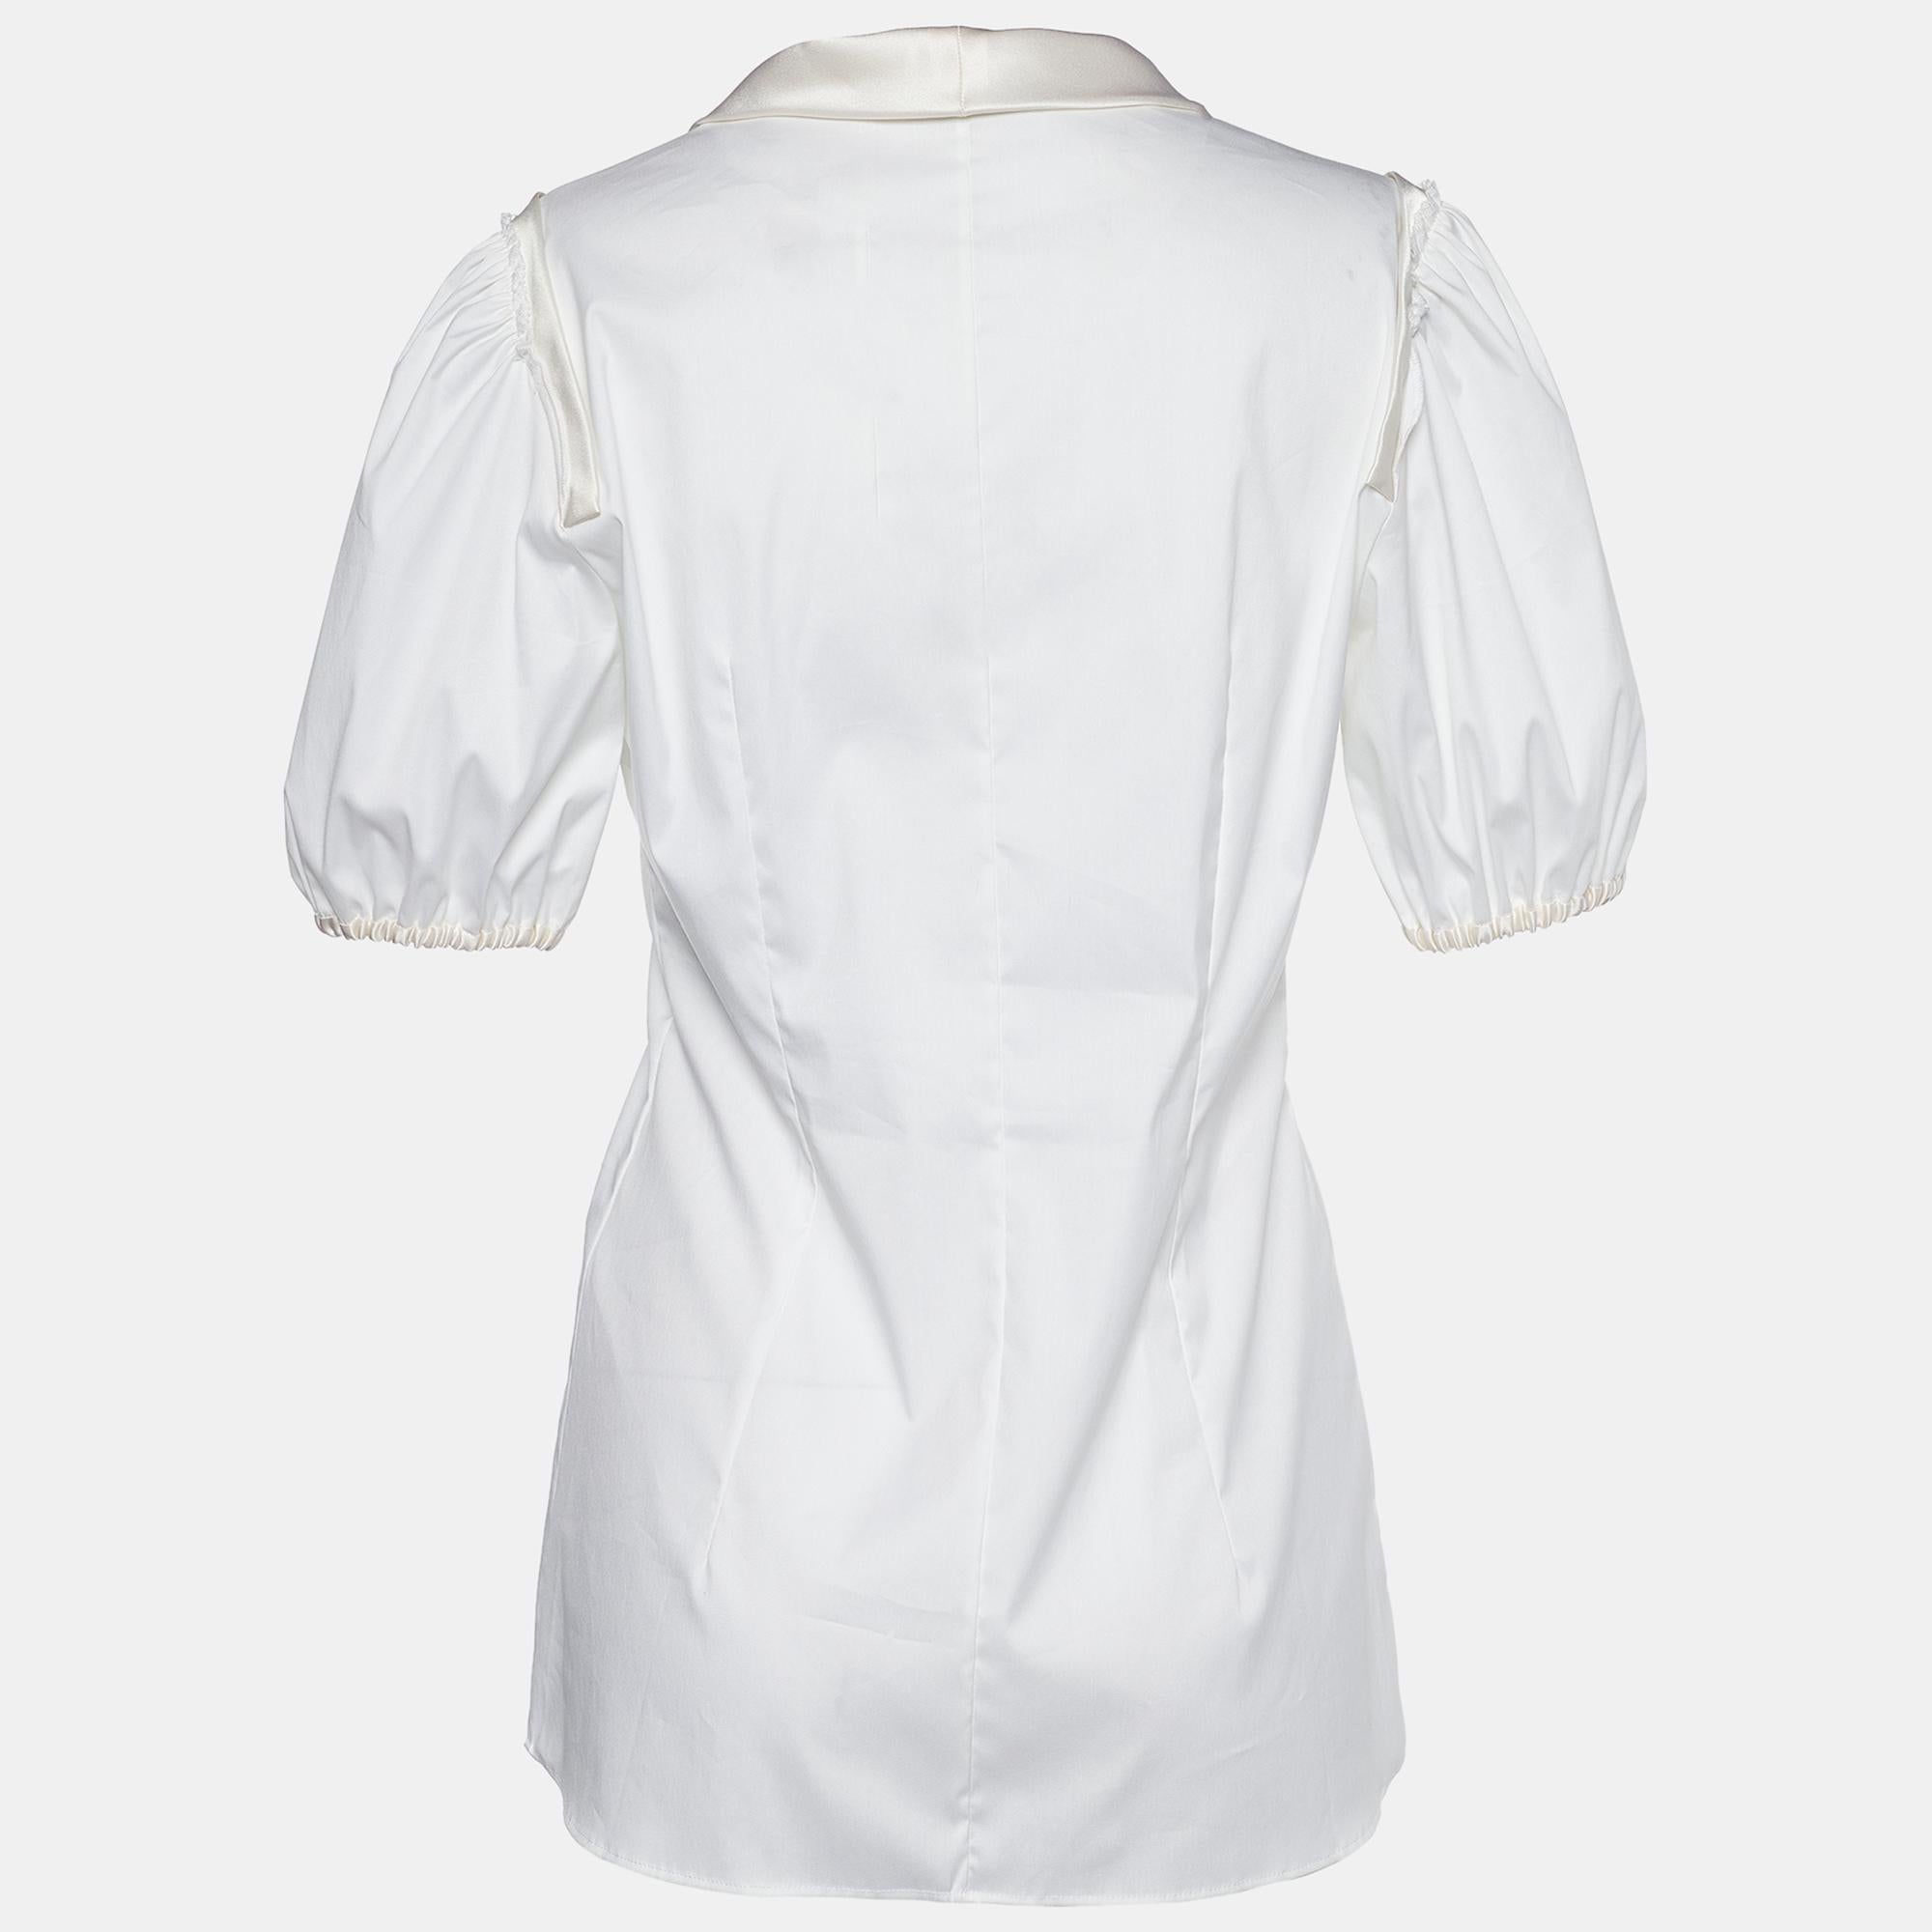 This blouse from the House of Dolce & Gabbana is a beautiful creation you need to add to your closet. It is made from off-white poplin fabric, which is elevated with a bow tie on the front. It flaunts short sleeves and buttoned closures. Style this